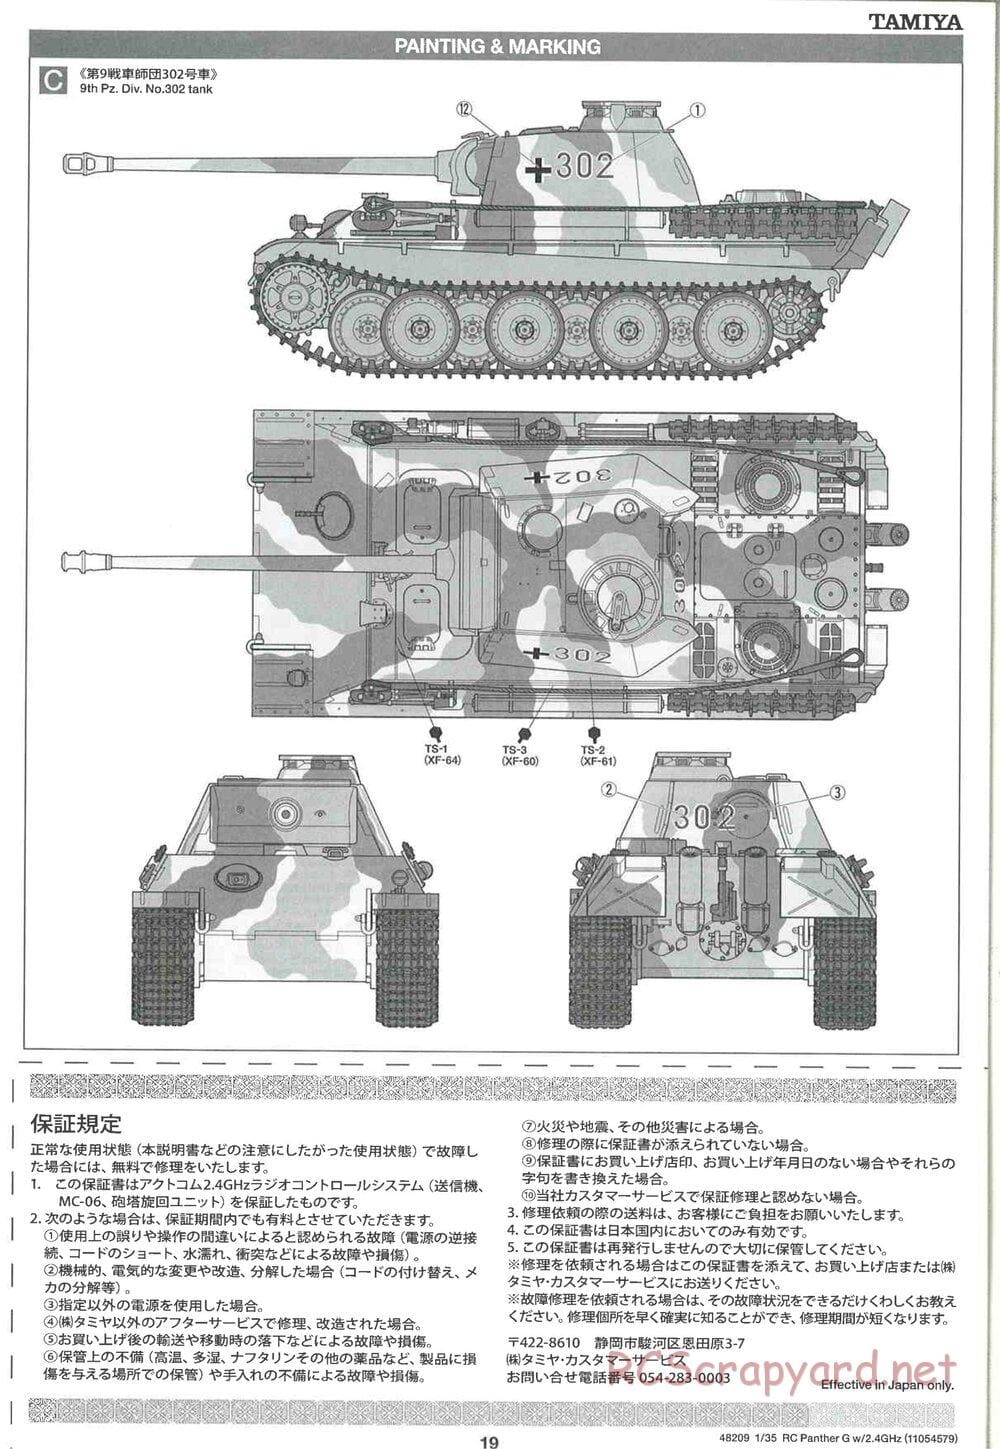 Tamiya - German Panther Type G - Late Version - 1/35 Scale Chassis - Manual - Page 19